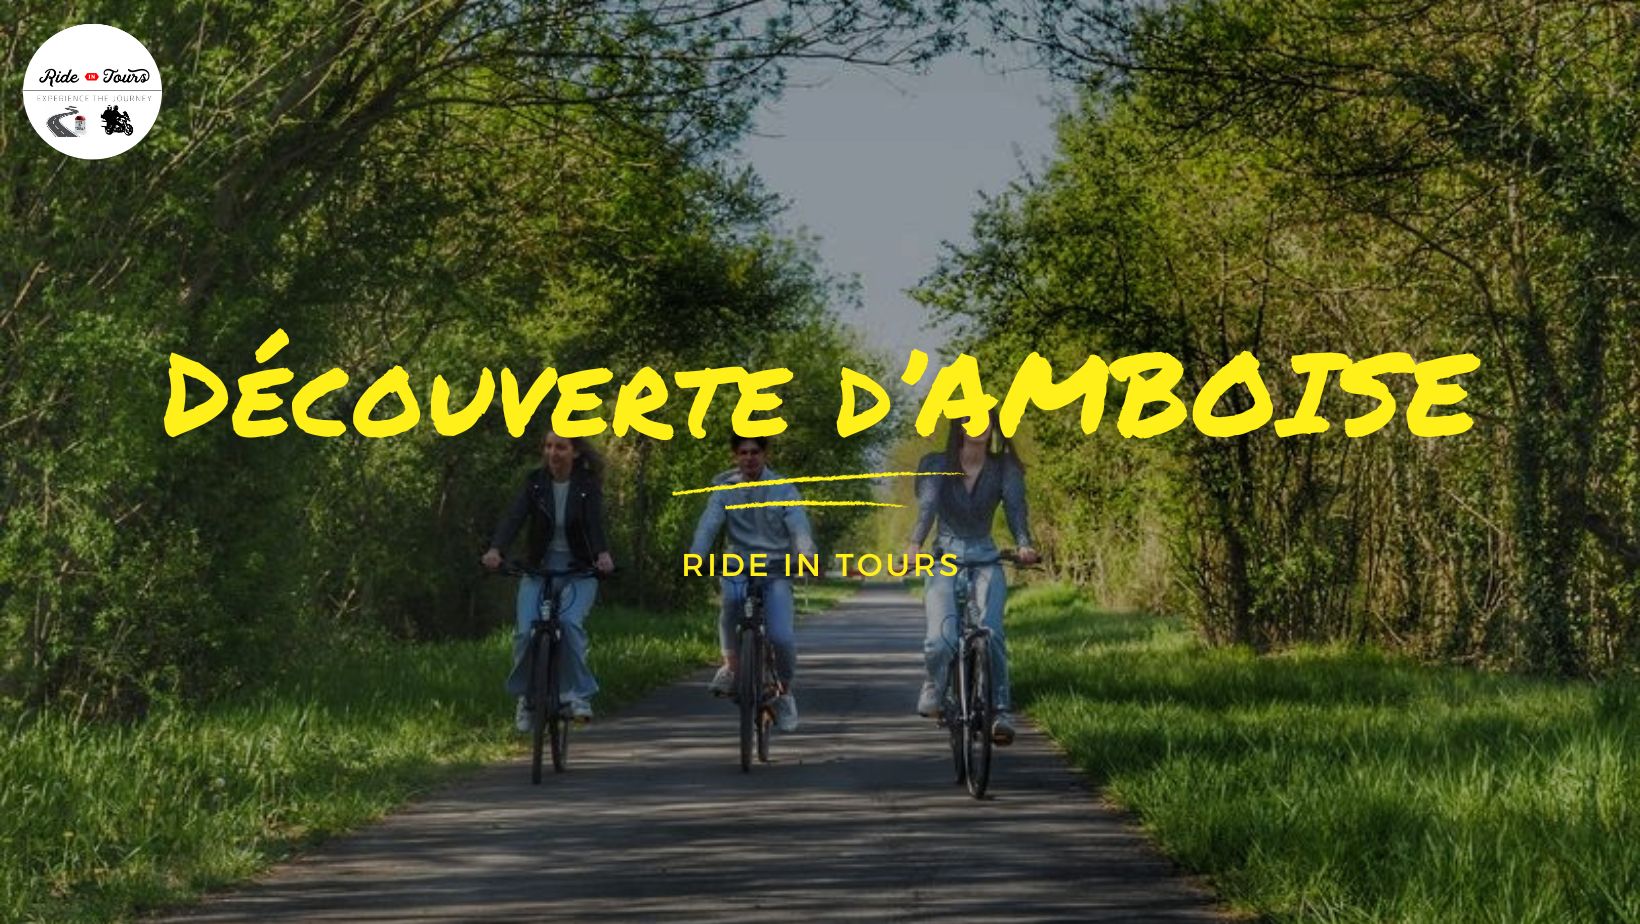 Decouverte d'amboise by Ride in Tours.jpg